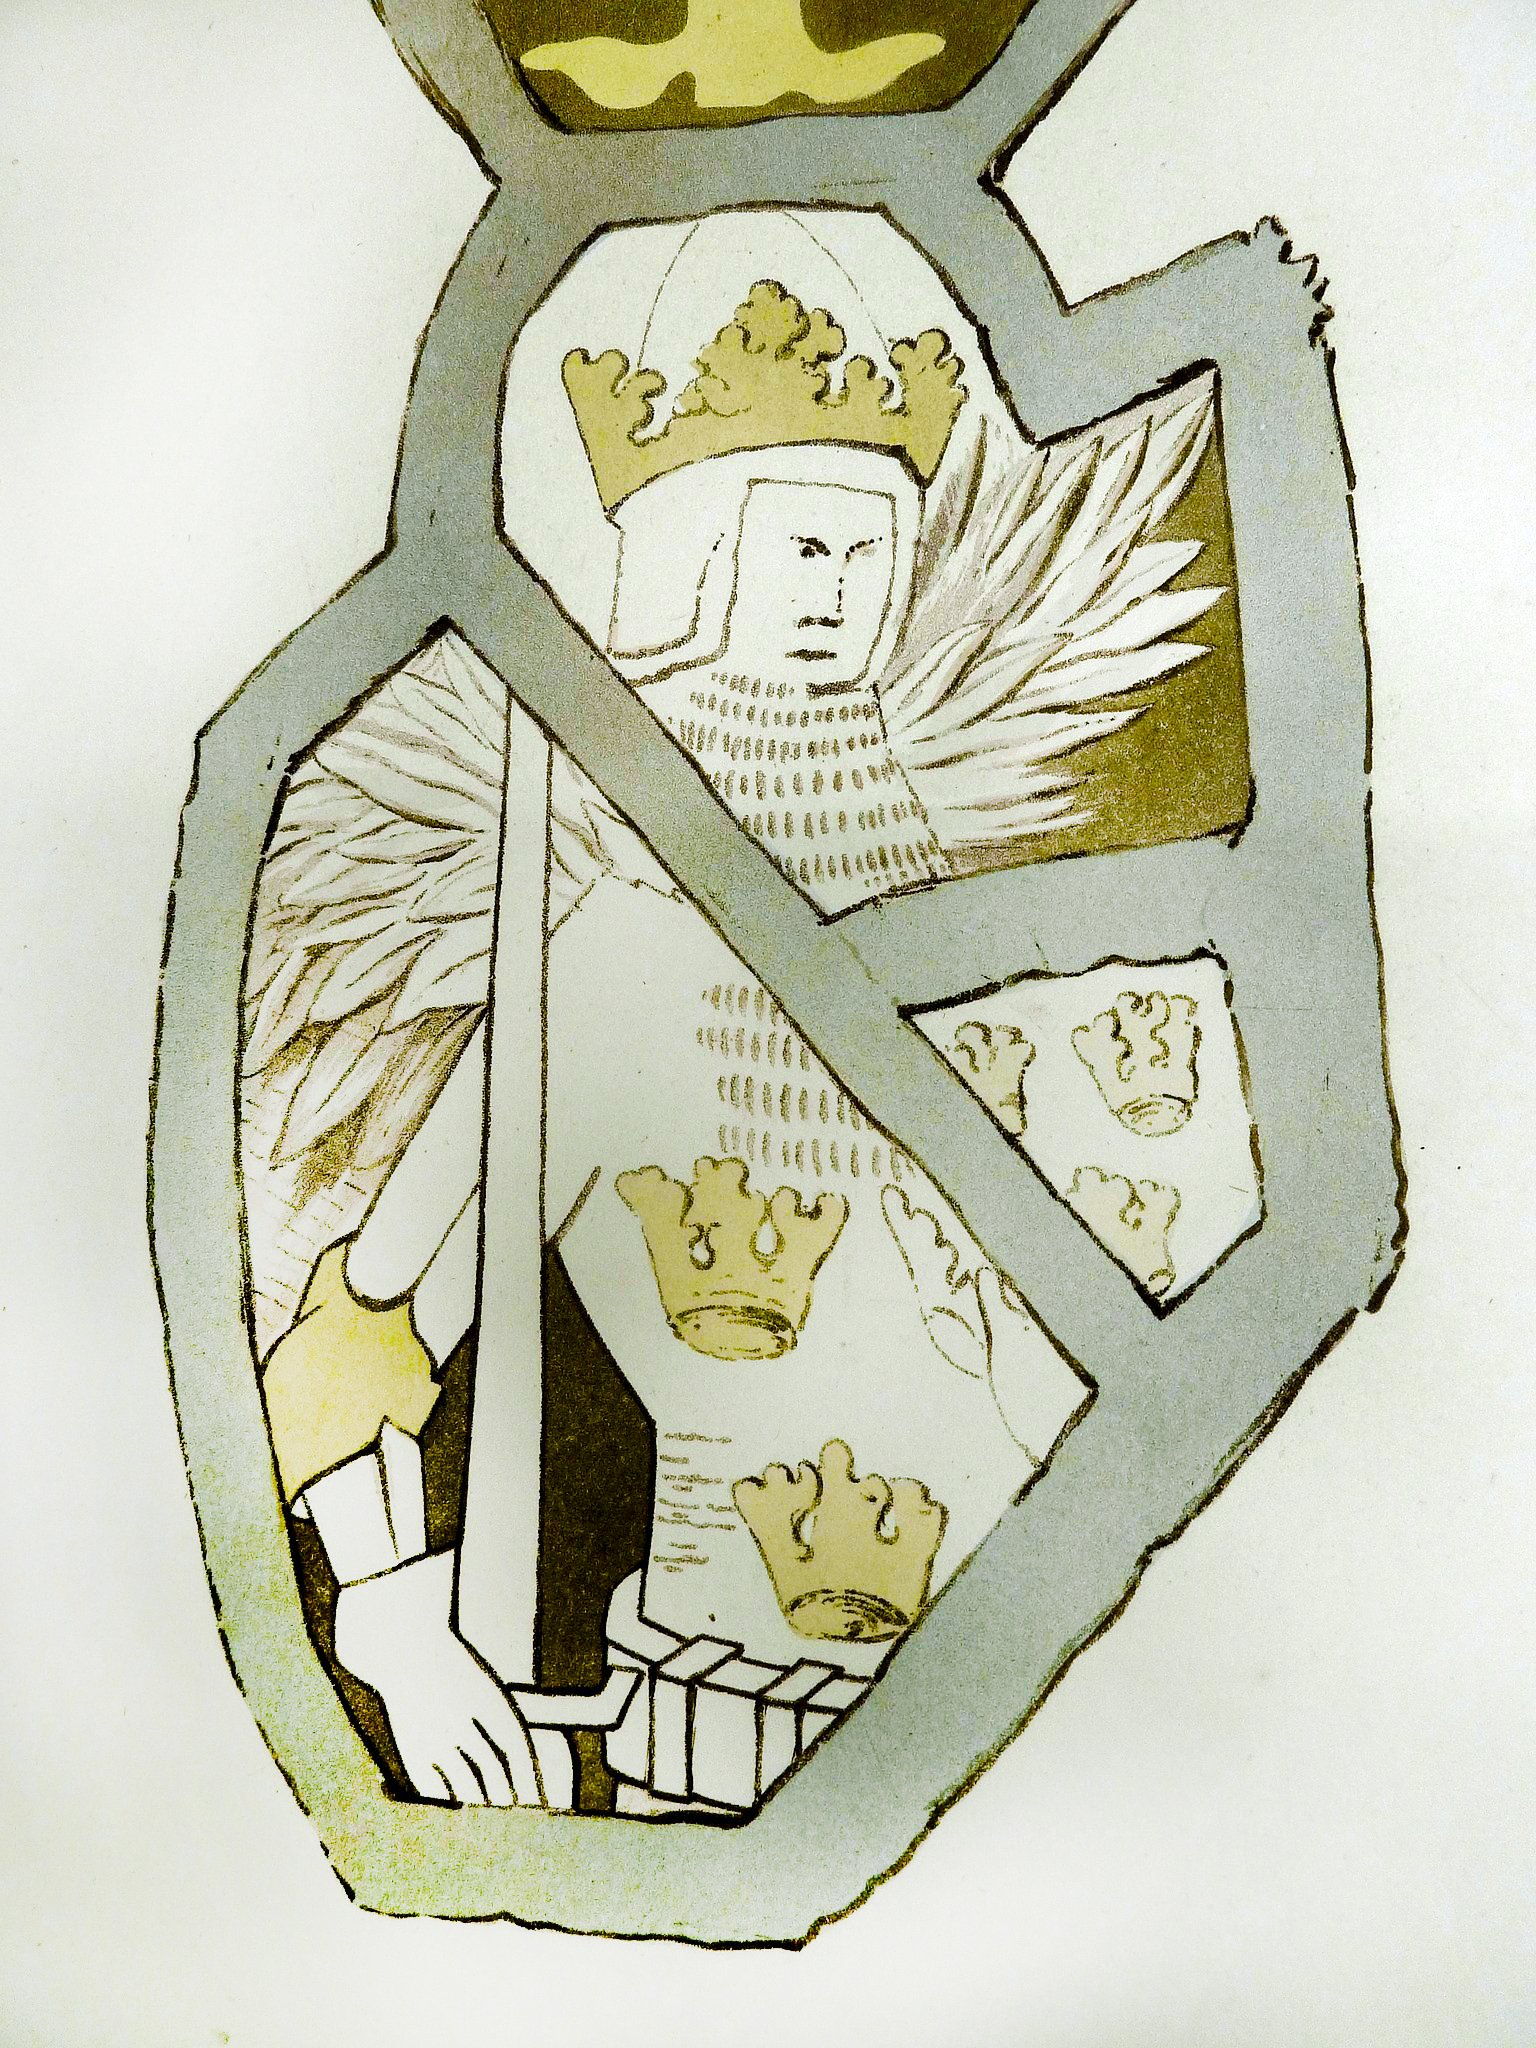 An illustration of a coat of arms with a gold crown, a white figure of Redwald King with wings, and a gold hand holding a sword on a green, blue, and white shield. The shield is surrounded by a gray border with gold crowns on it. The background is white.